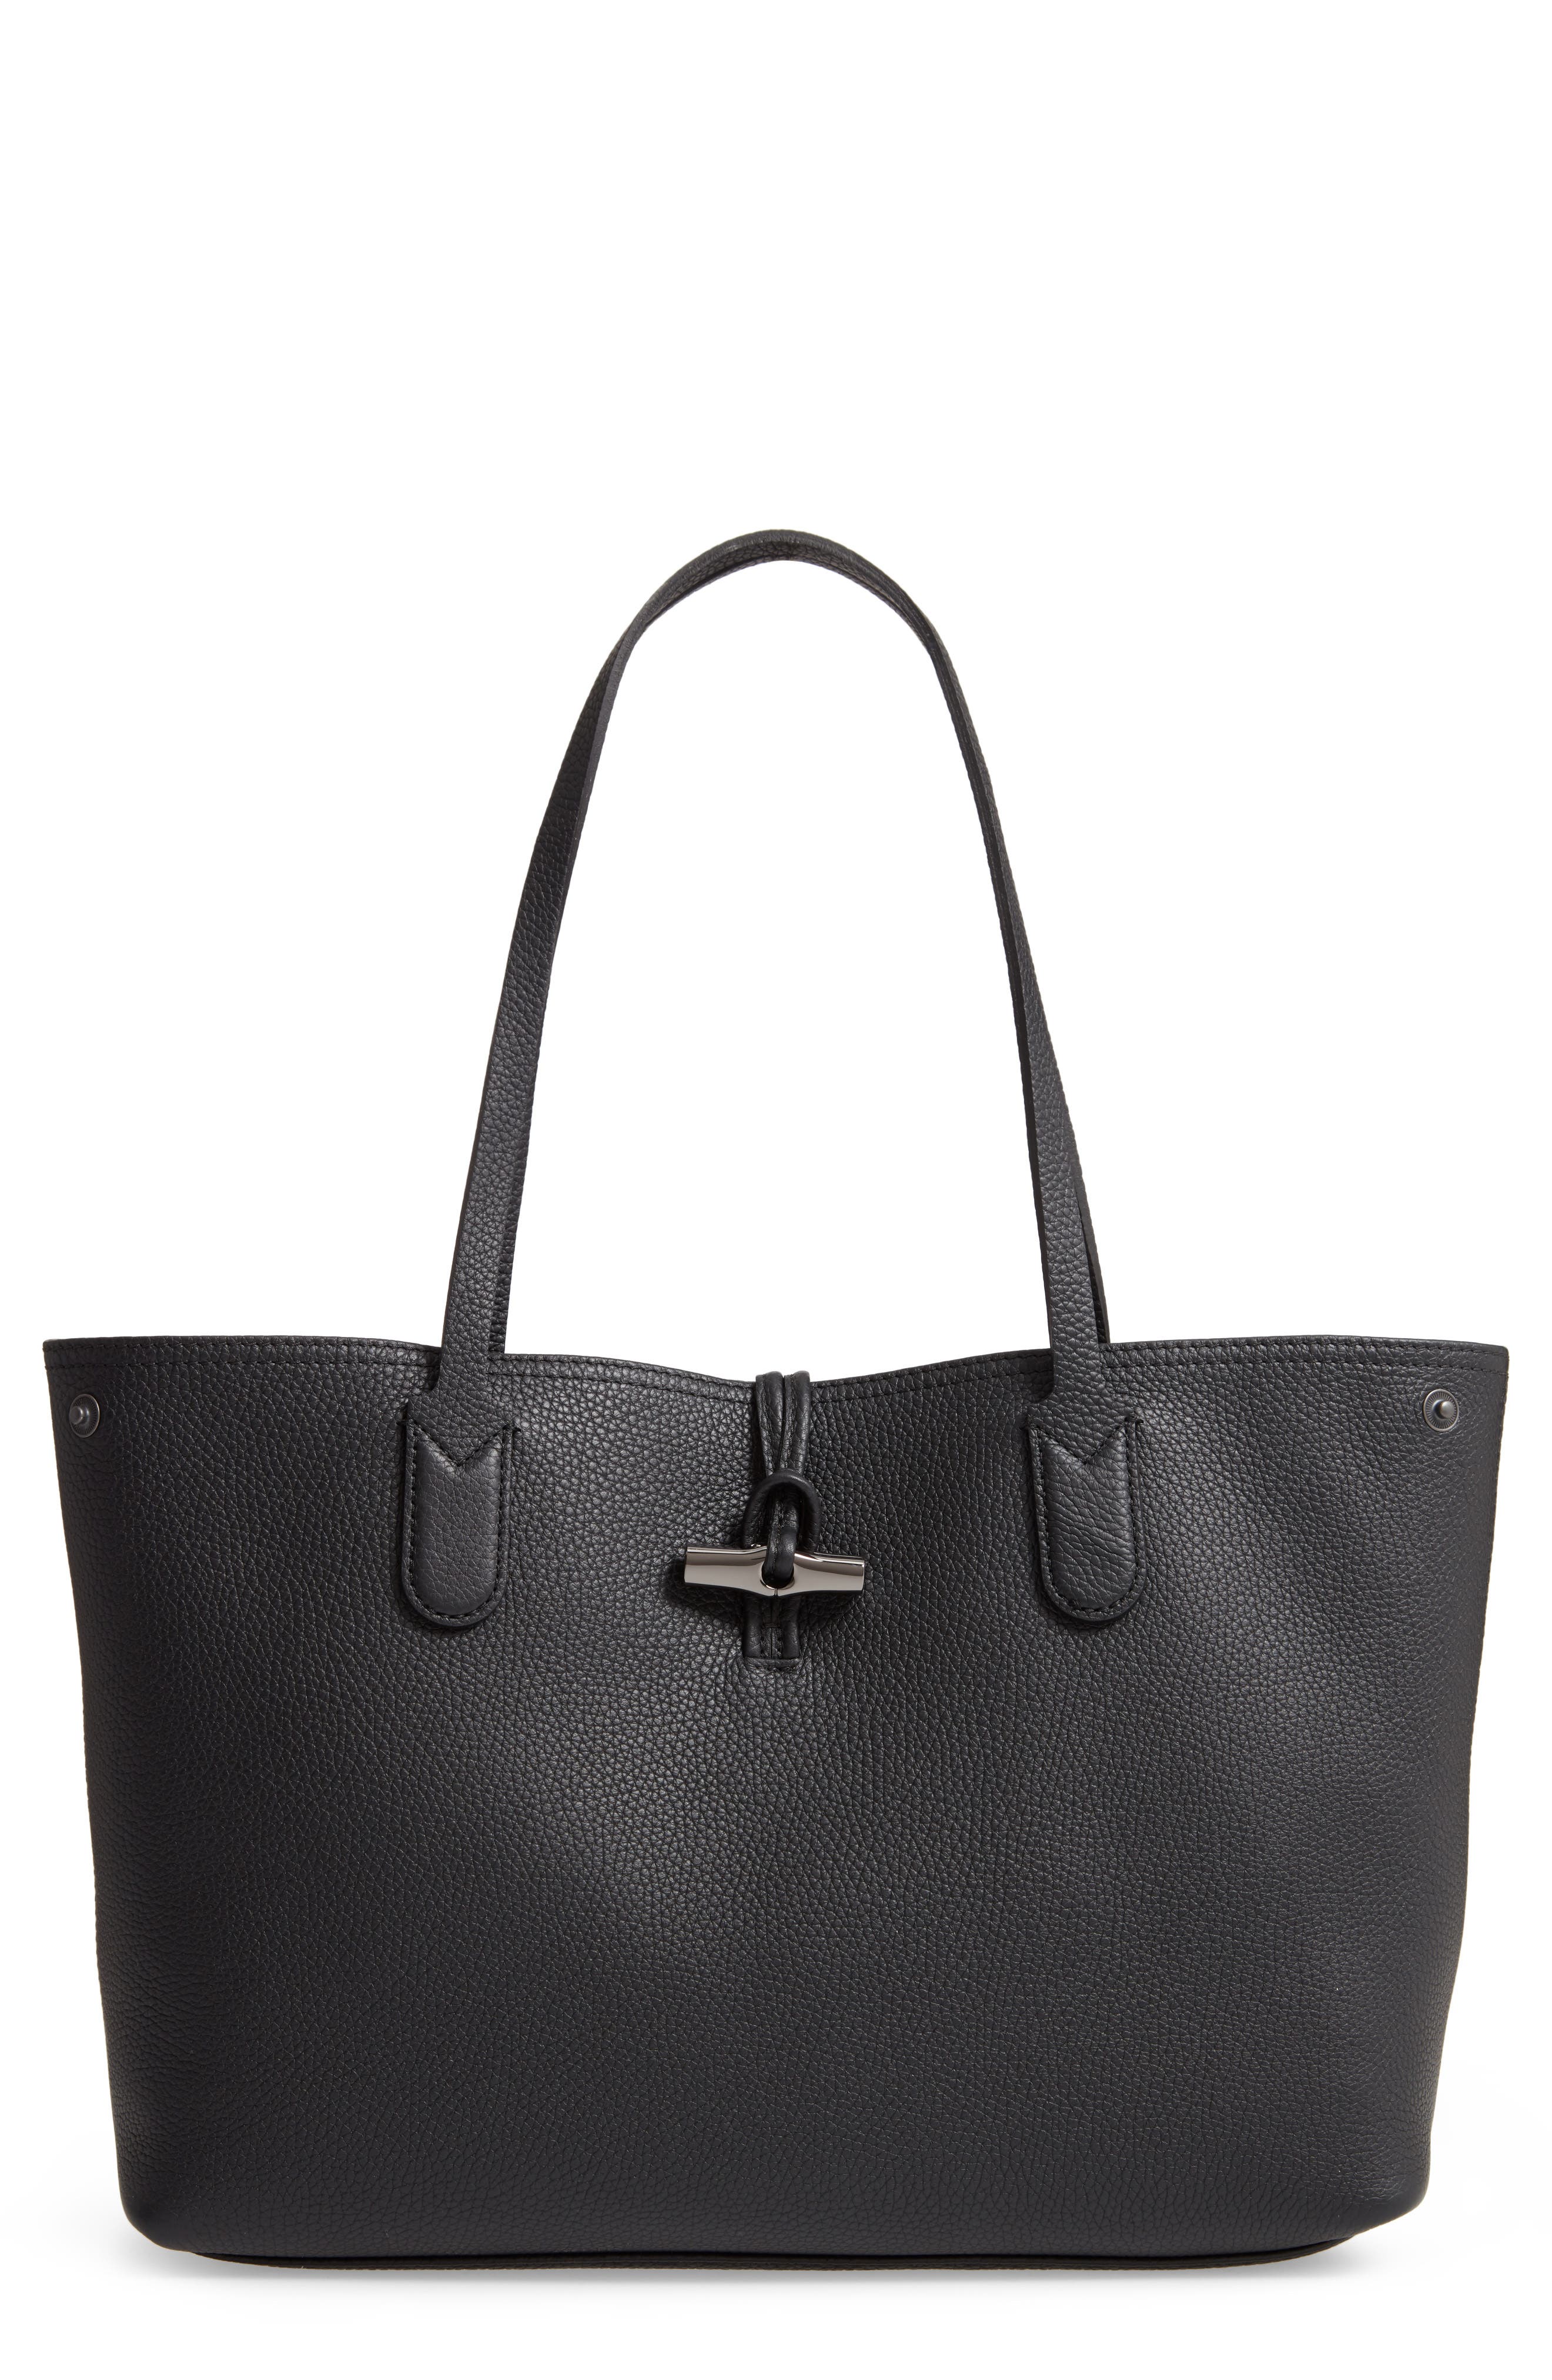 Longchamp Roseau Essential Mid Leather Tote in Black at Nordstrom